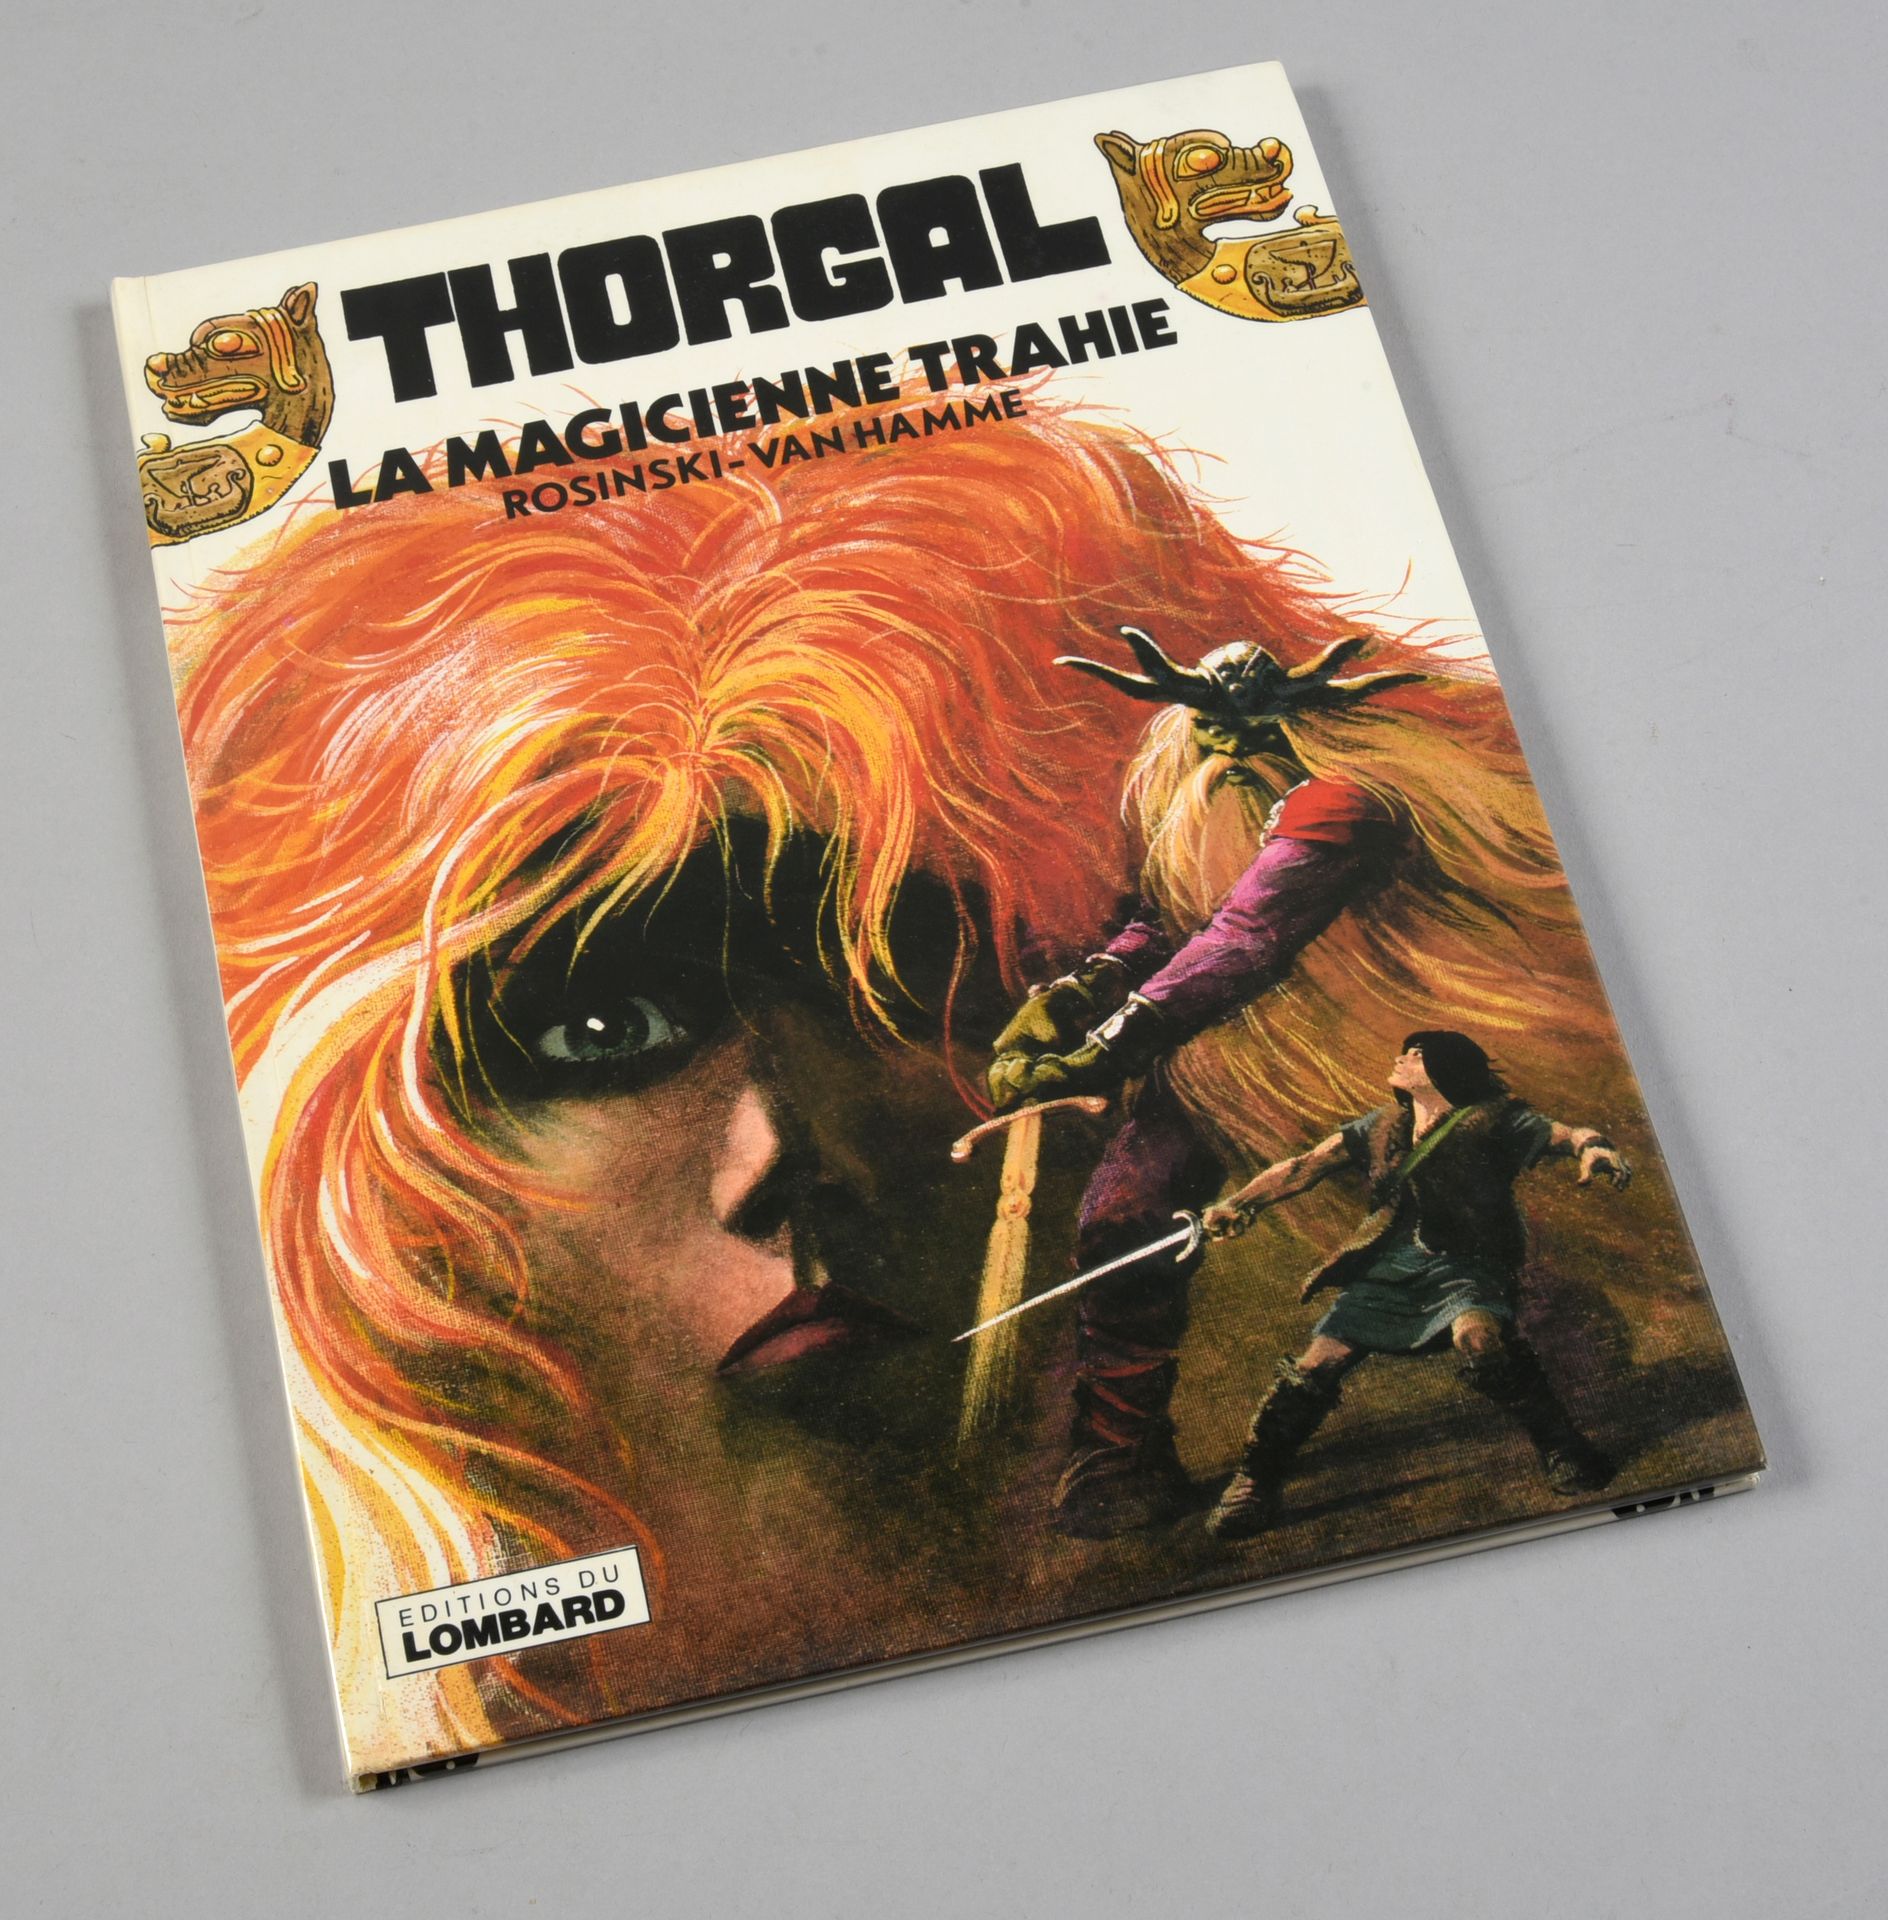 ROSINSKI THORGAL 01. LA MAGICIENNE TRAHIE. First edition Lombard with a superb d&hellip;